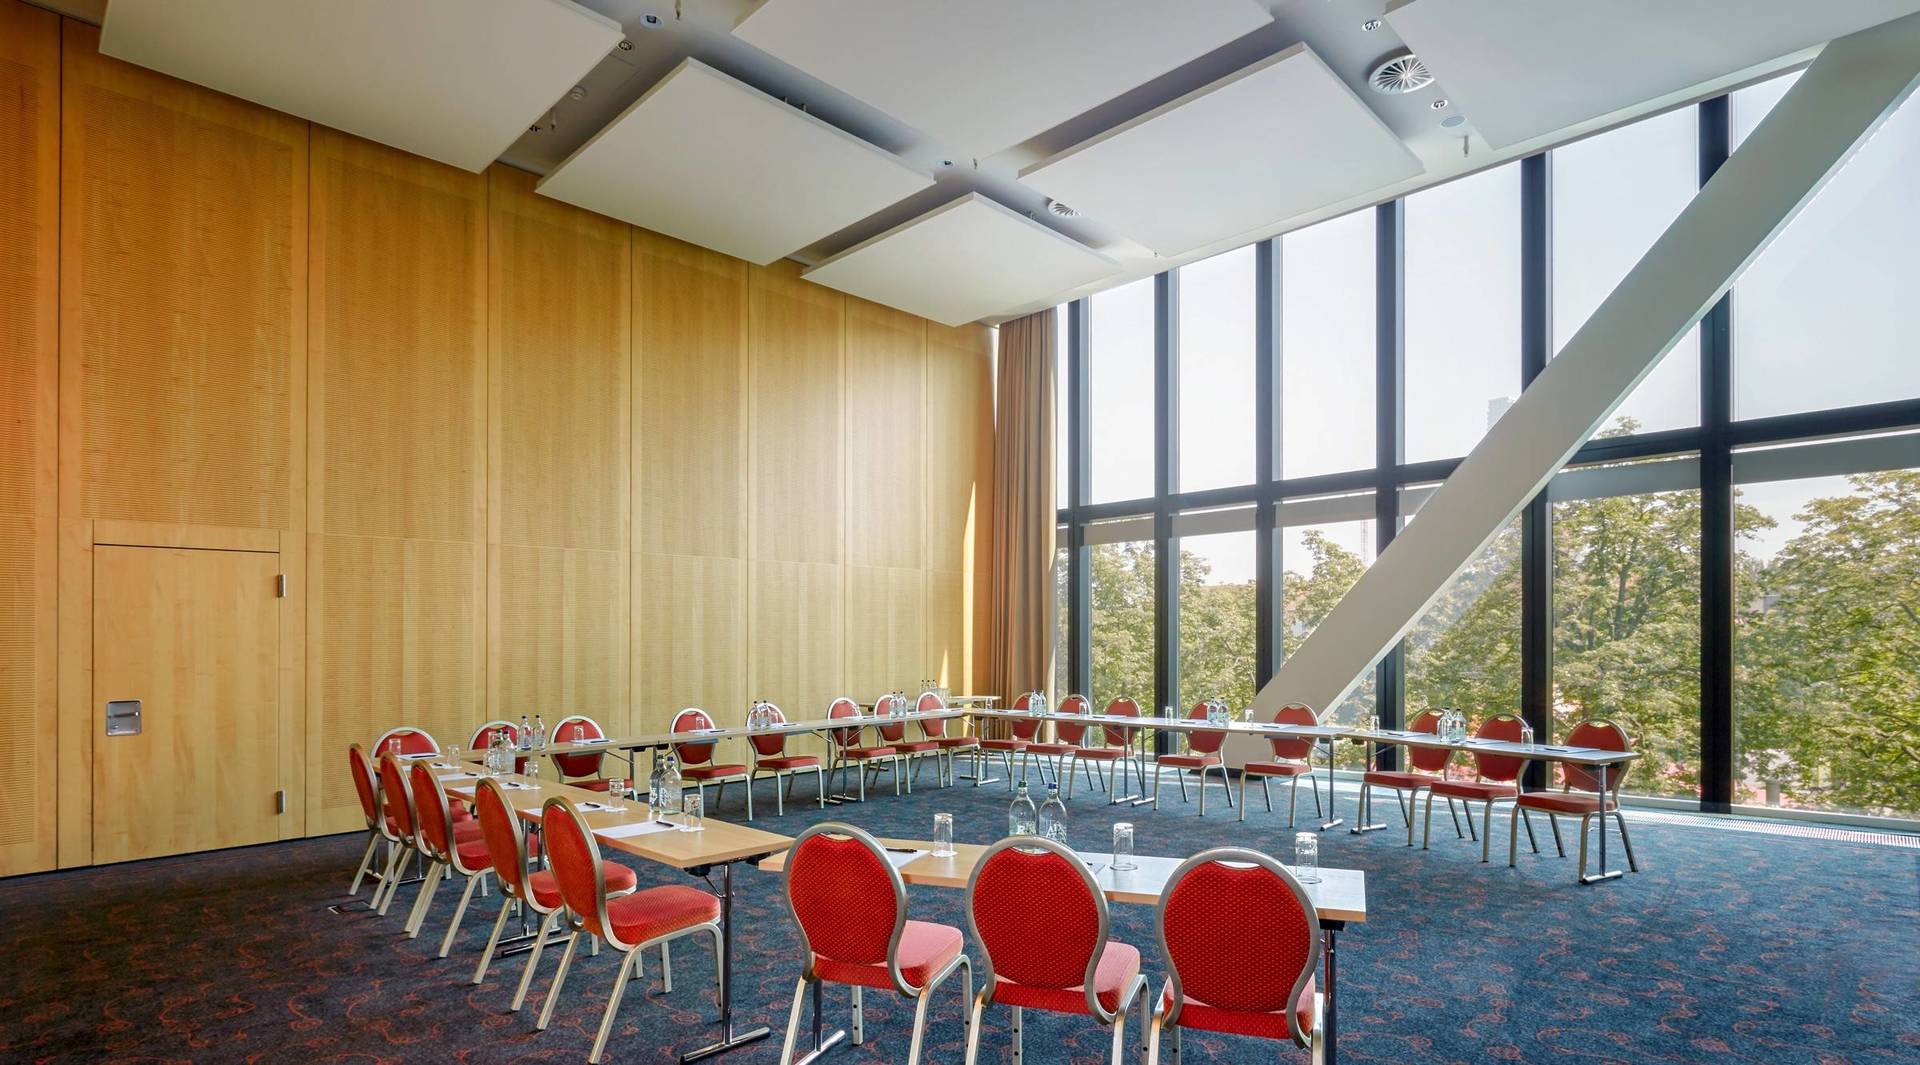 Modern meeting rooms at the im Hyperion Hotel Basel - Official website